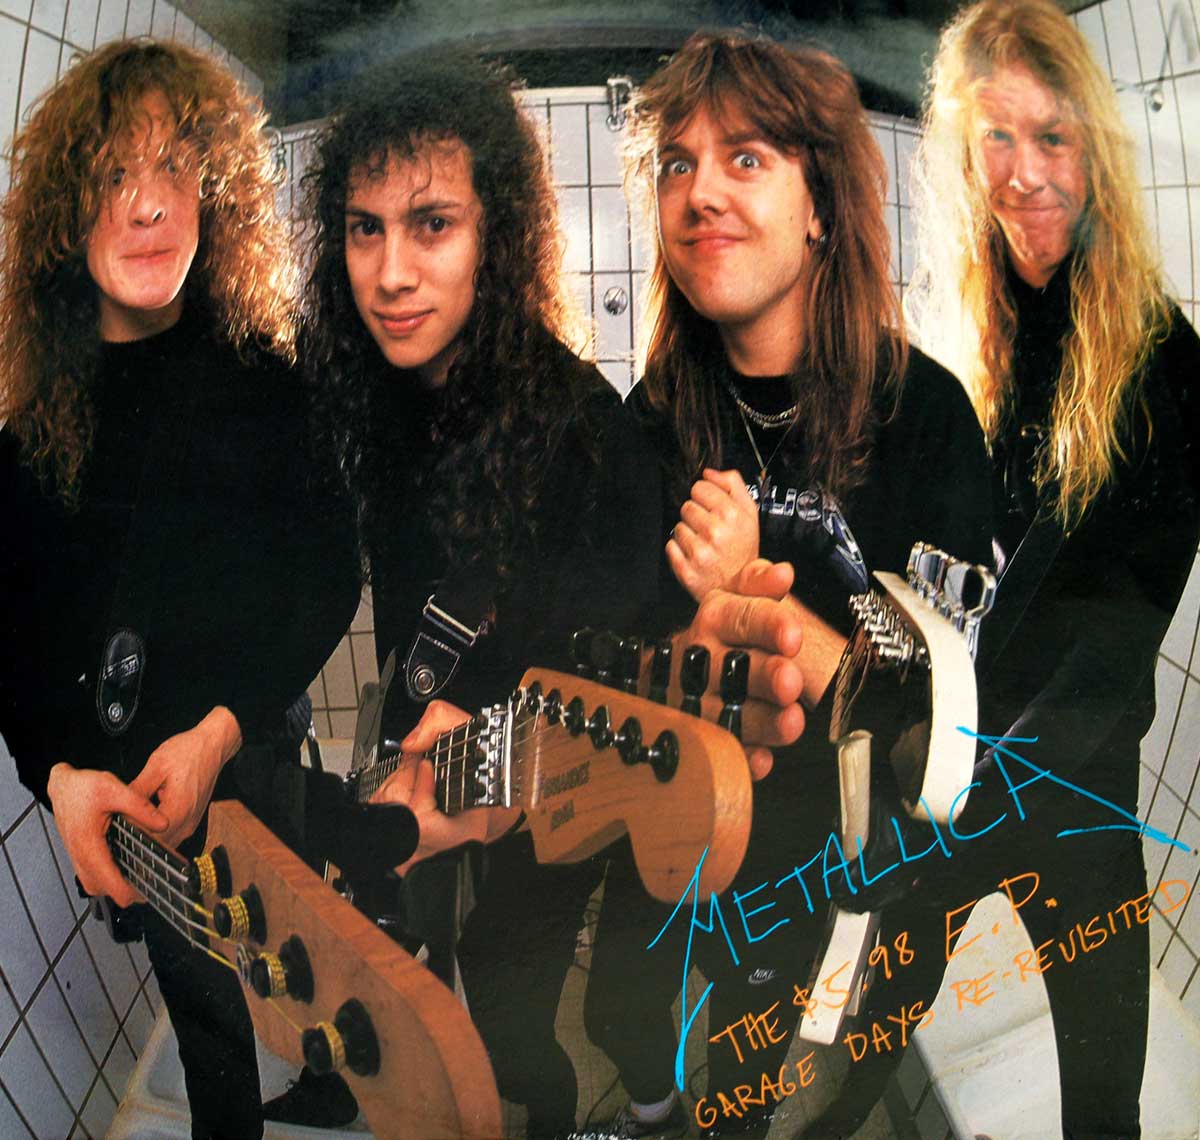 High Quality Photo of Album Front Cover  "METALLICA - The 5.98 Garage Days Re-Revisited (UK)"